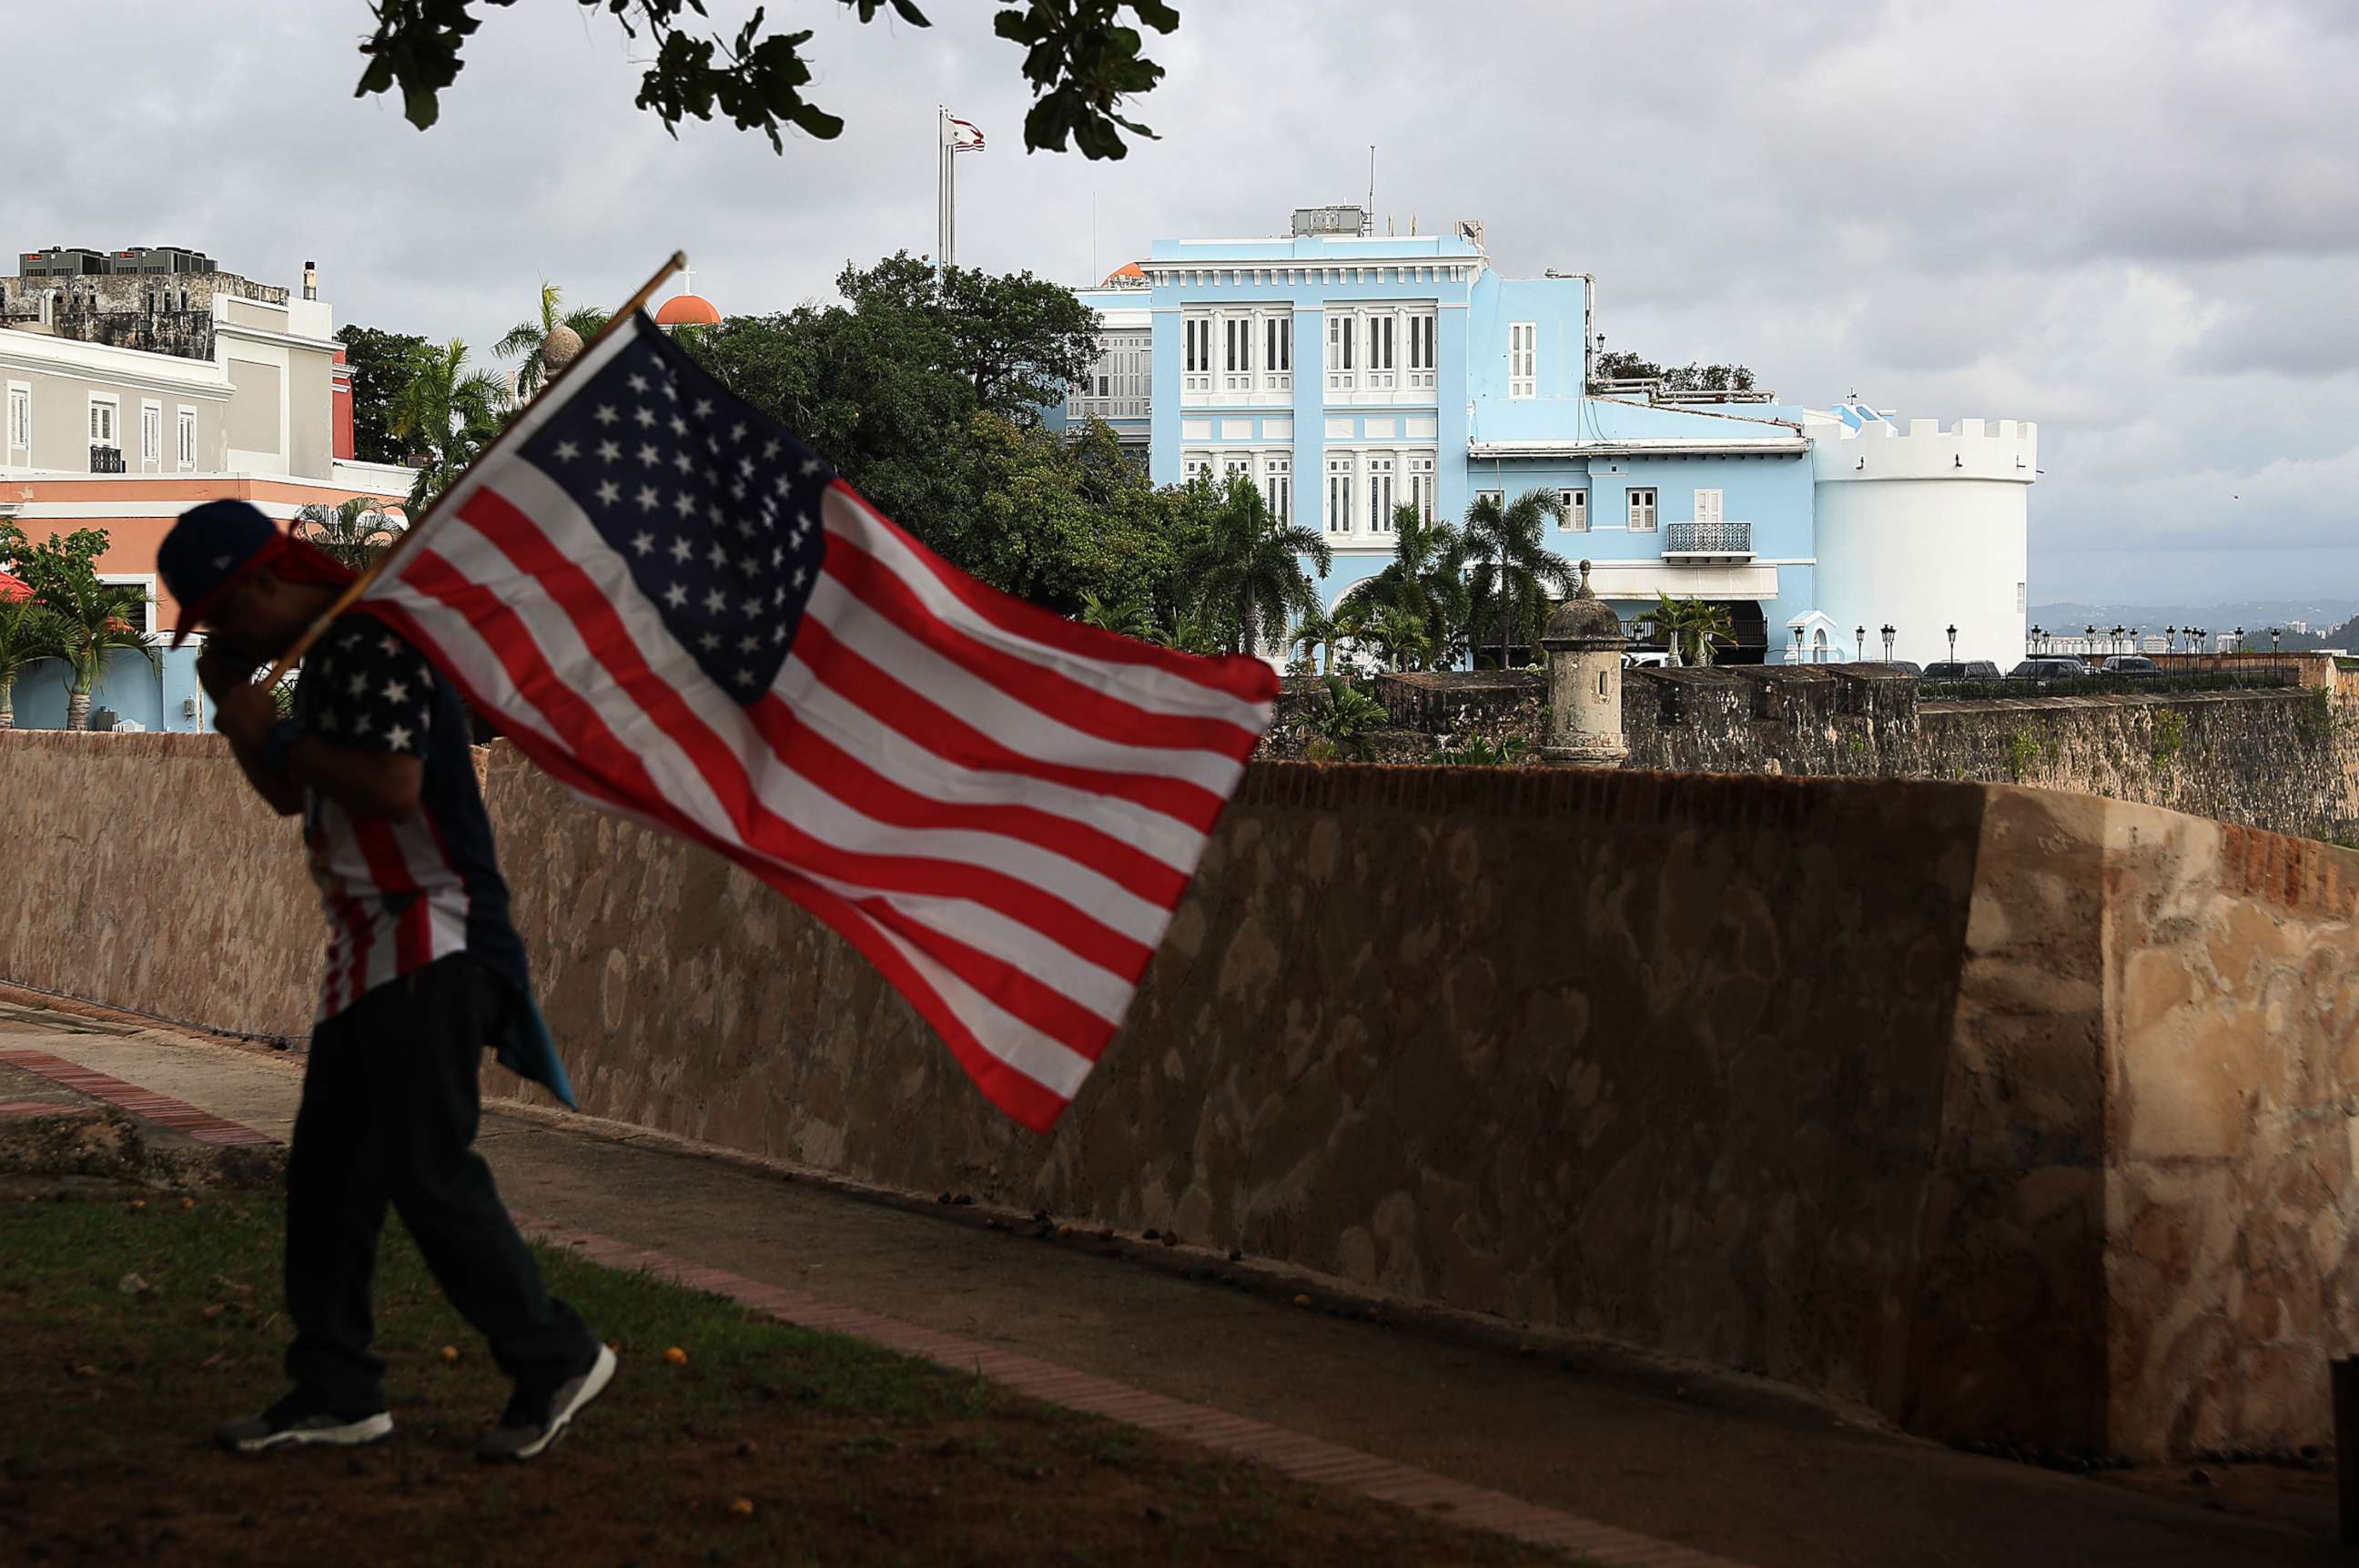 PHOTO: A man carrying a U.S. flag walks past the governor's mansion where Ricardo Rossello, the Governor of Puerto Rico lives in Old San Juan, Puerto Rico, Aug. 1, 2019.